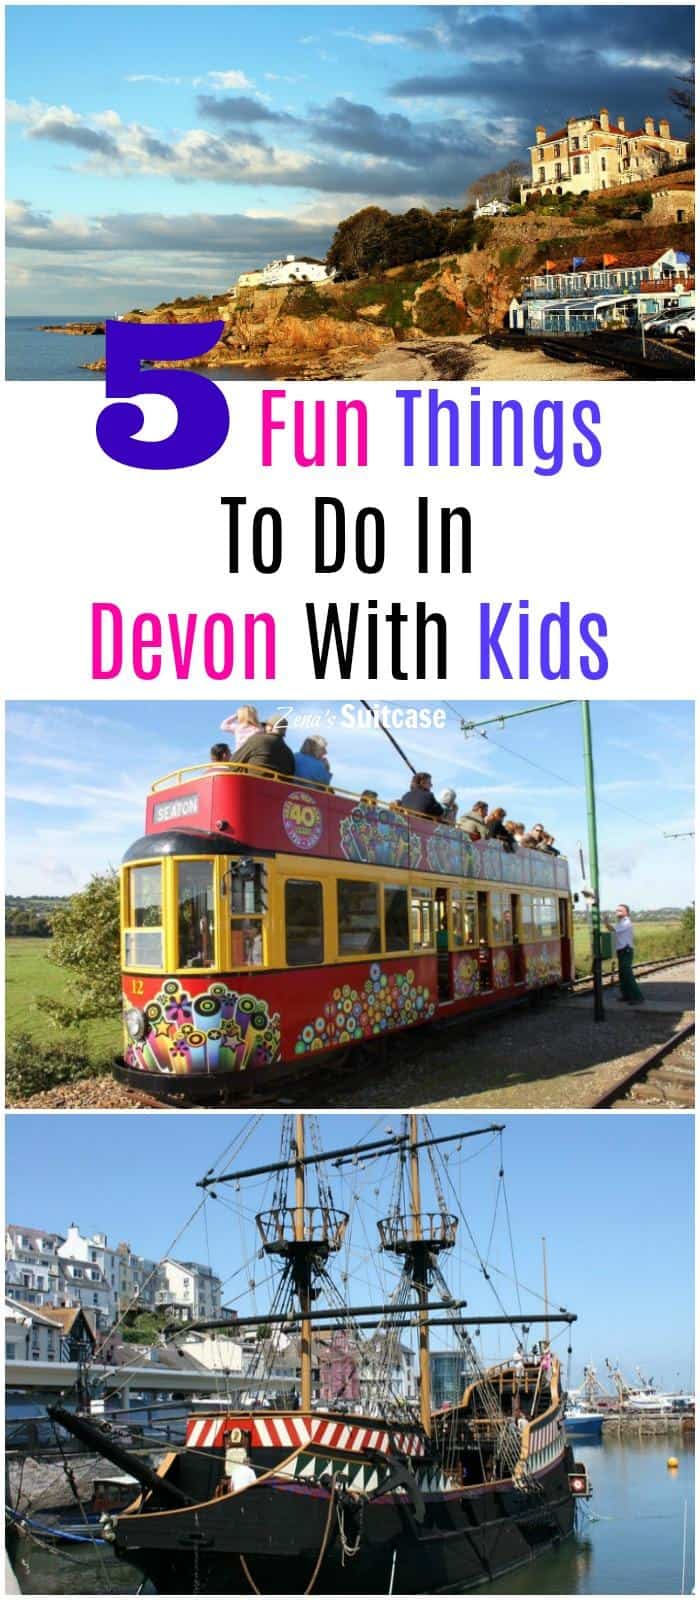 Fun things to do with Devon with kids - - family friendly visitors attraction in Devon that will help you enjoy your holiday and learn about the area. These places to visit in Devon are fun for all the family #Devon #Thingstodo #familyholiday